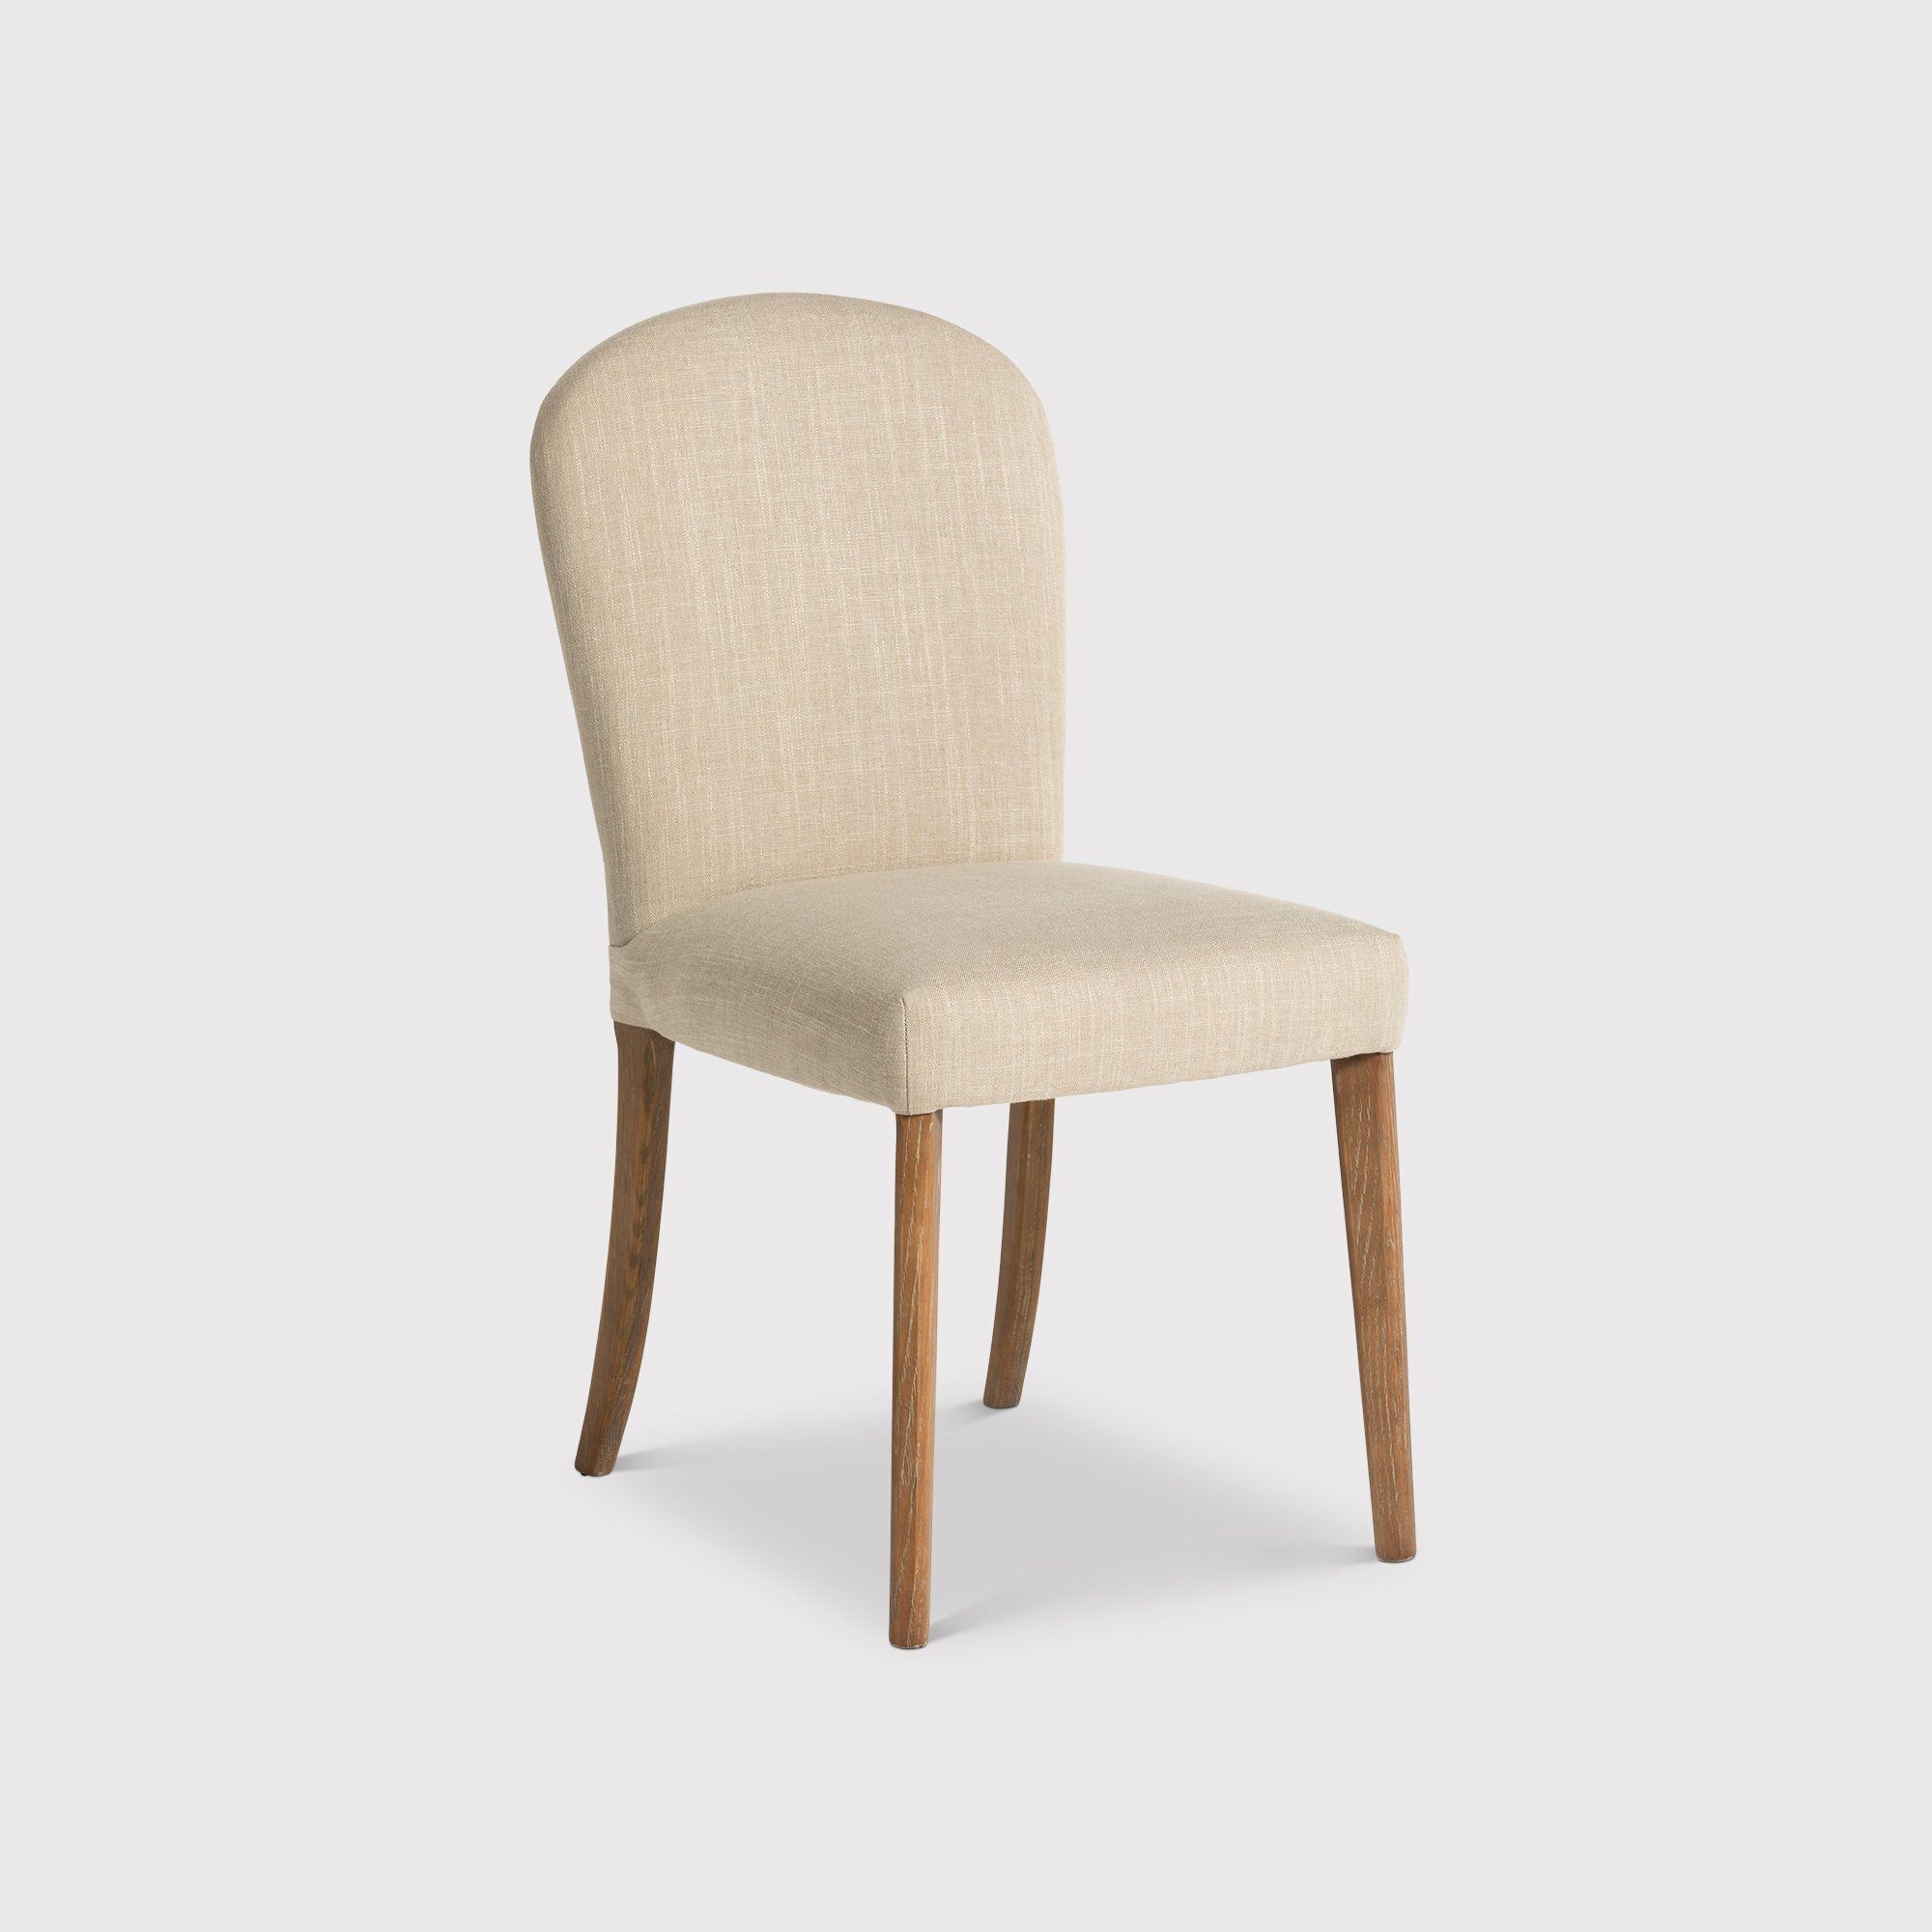 Maurice Dining Chair, Neutral Fabric - Barker & Stonehouse - image 1